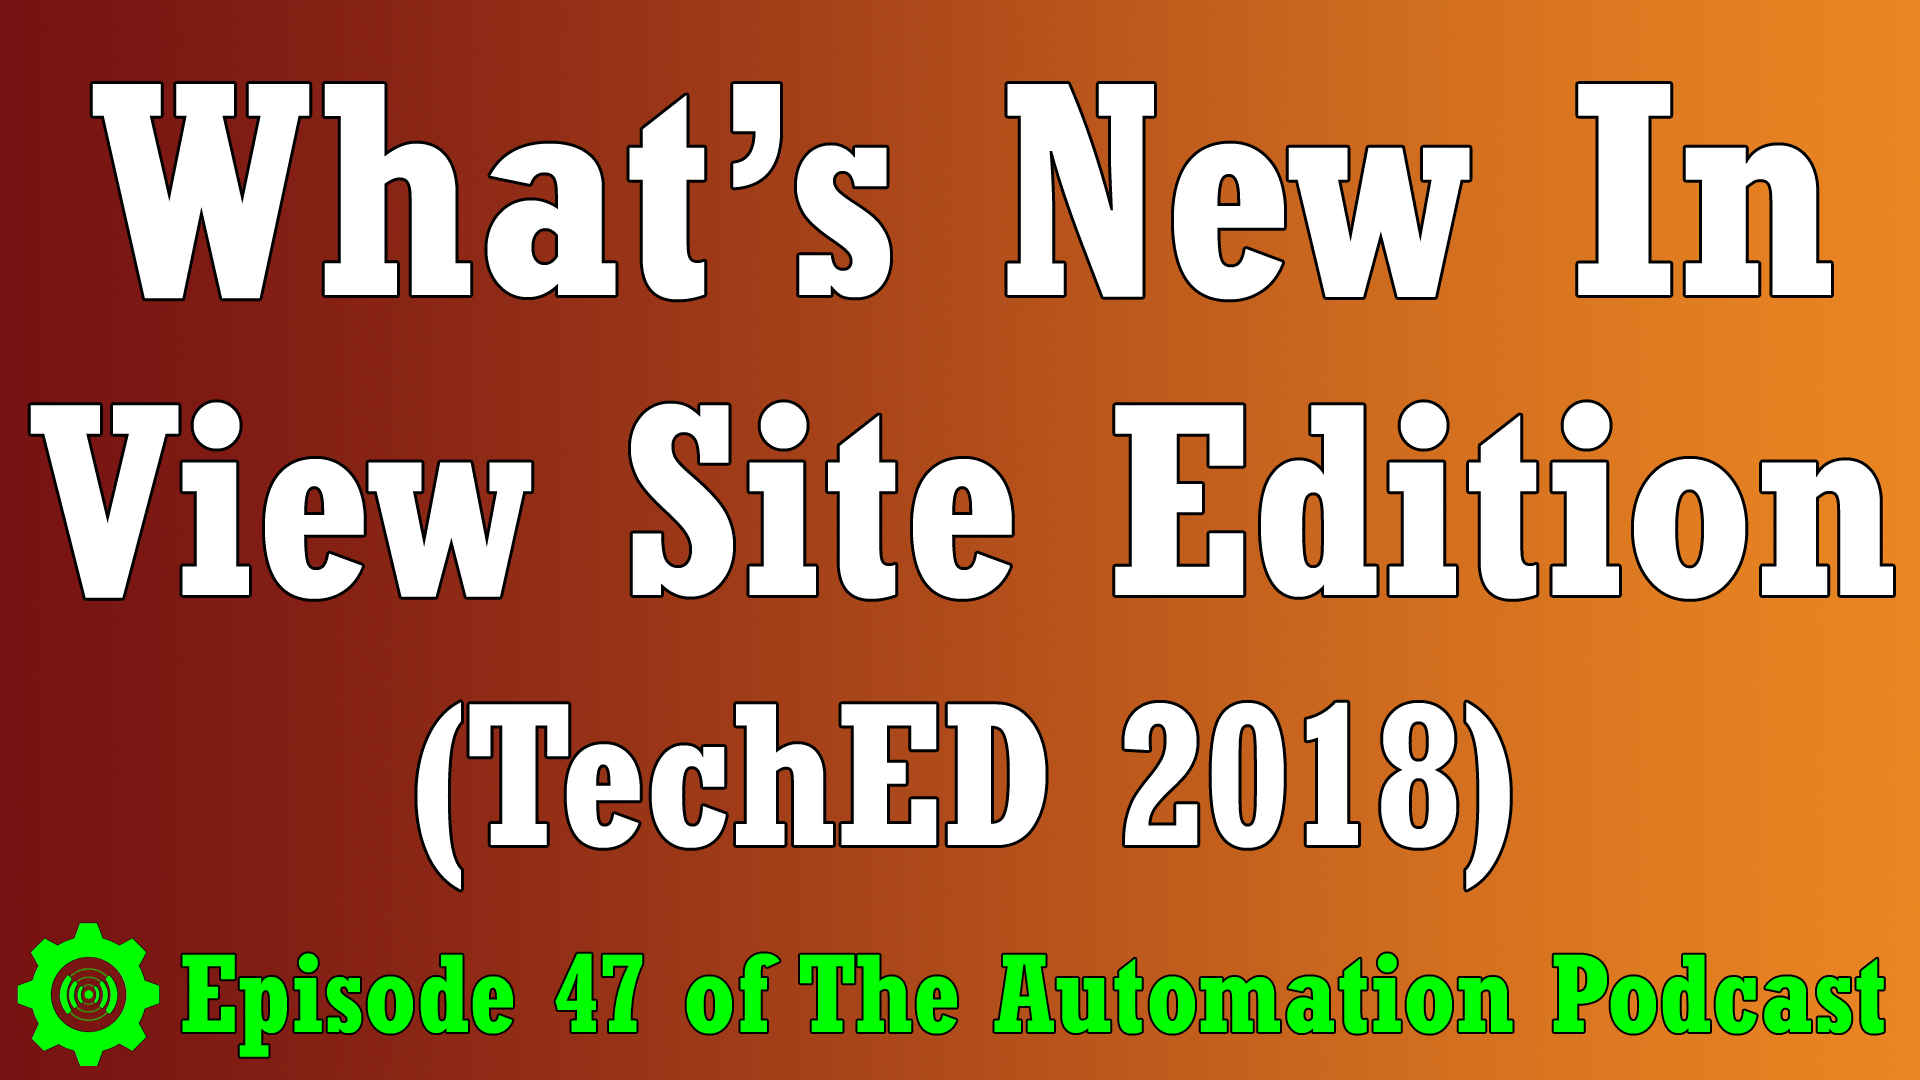 ViewSE - TechED 2018: What's New In FactoryTalk View Site Edition (P47)